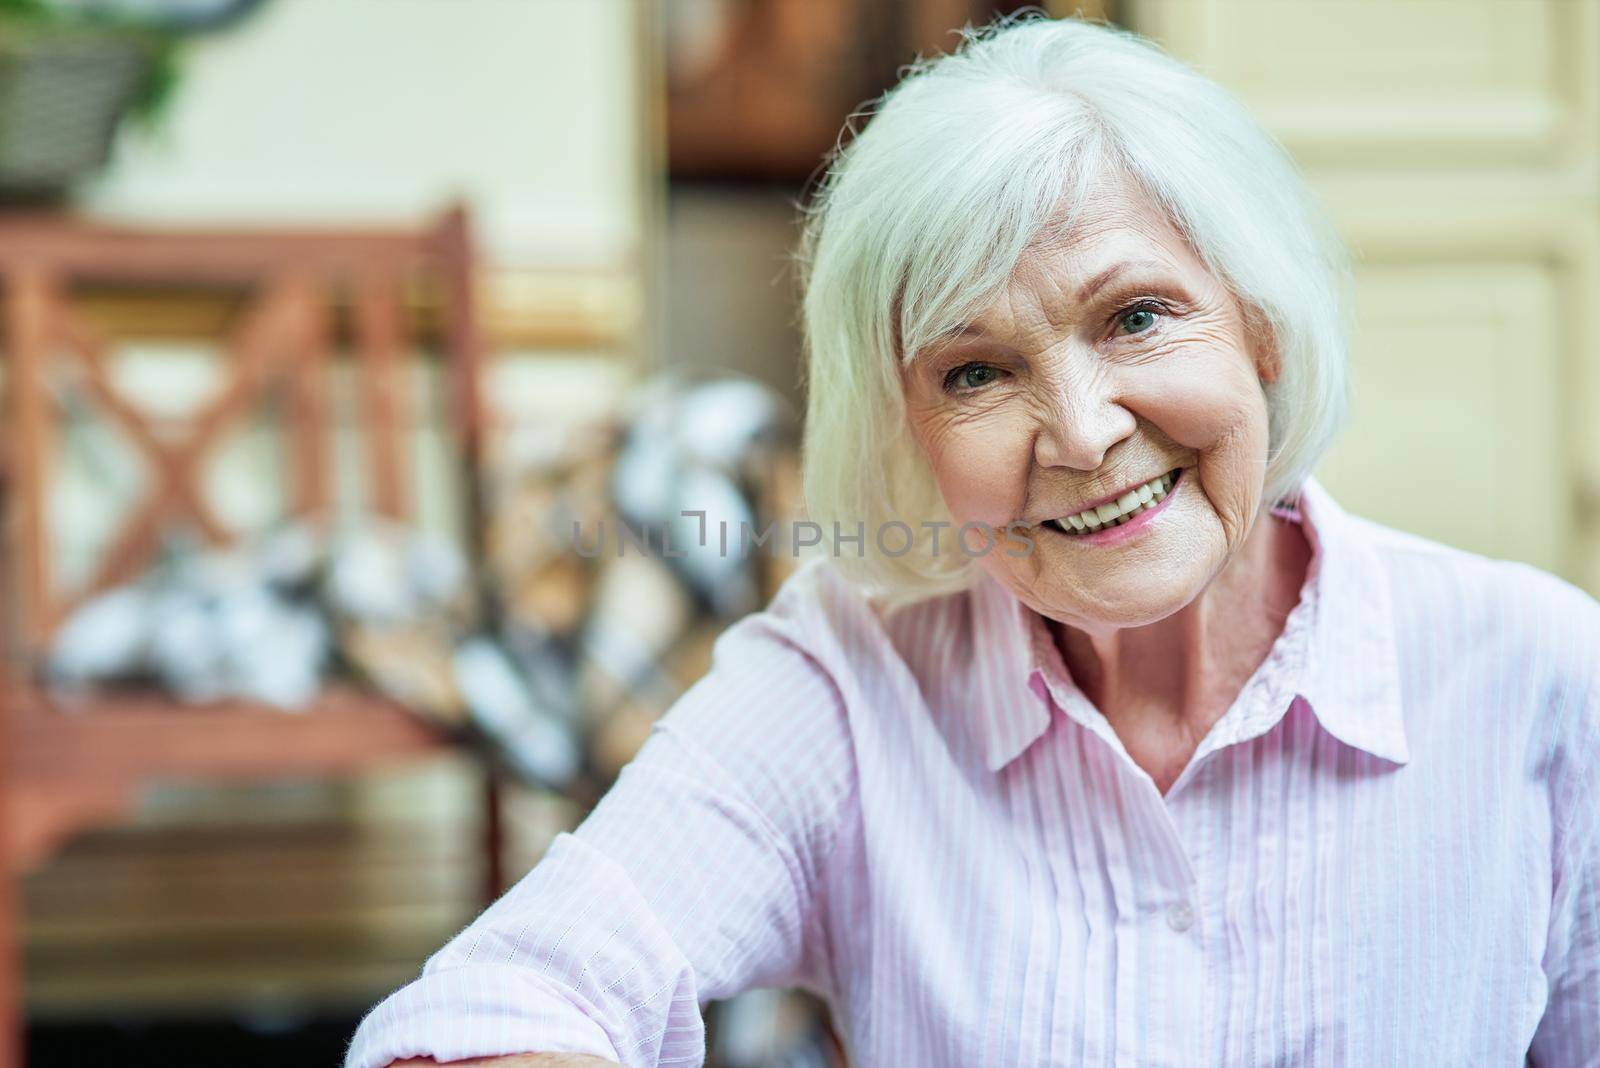 Waist up photo of happy pretty senior woman resting outdoors with her van on the background. Lifestyle concept